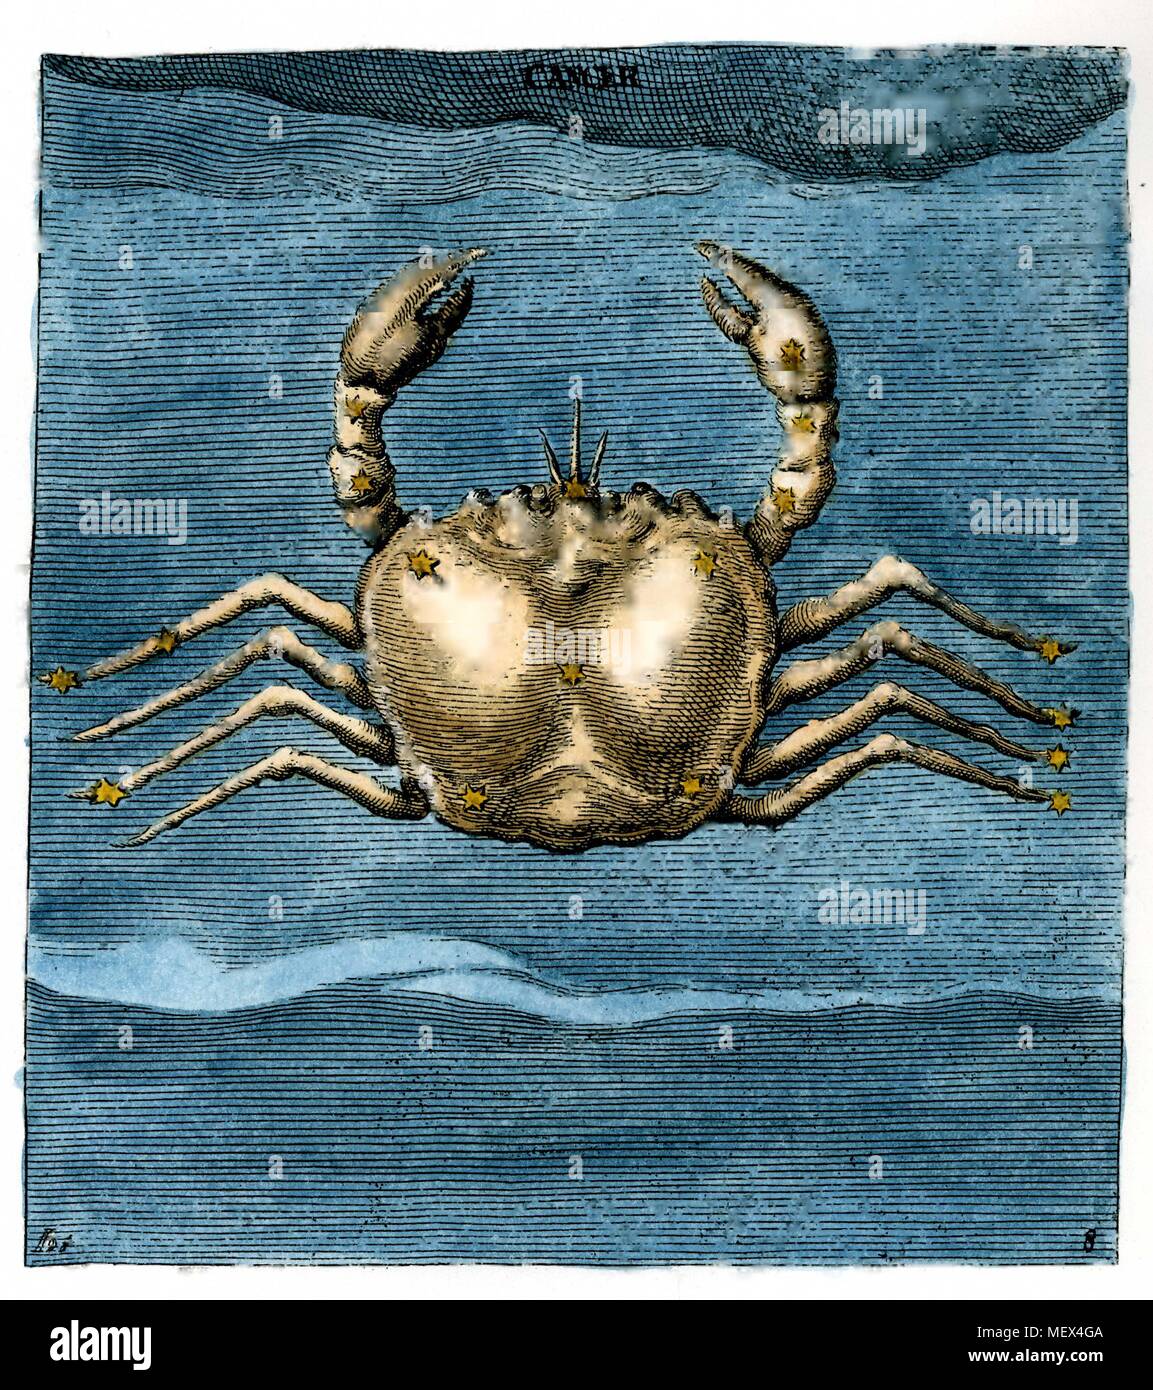 Astrology Zodiac Signs Cancer the Crab Stock Photo